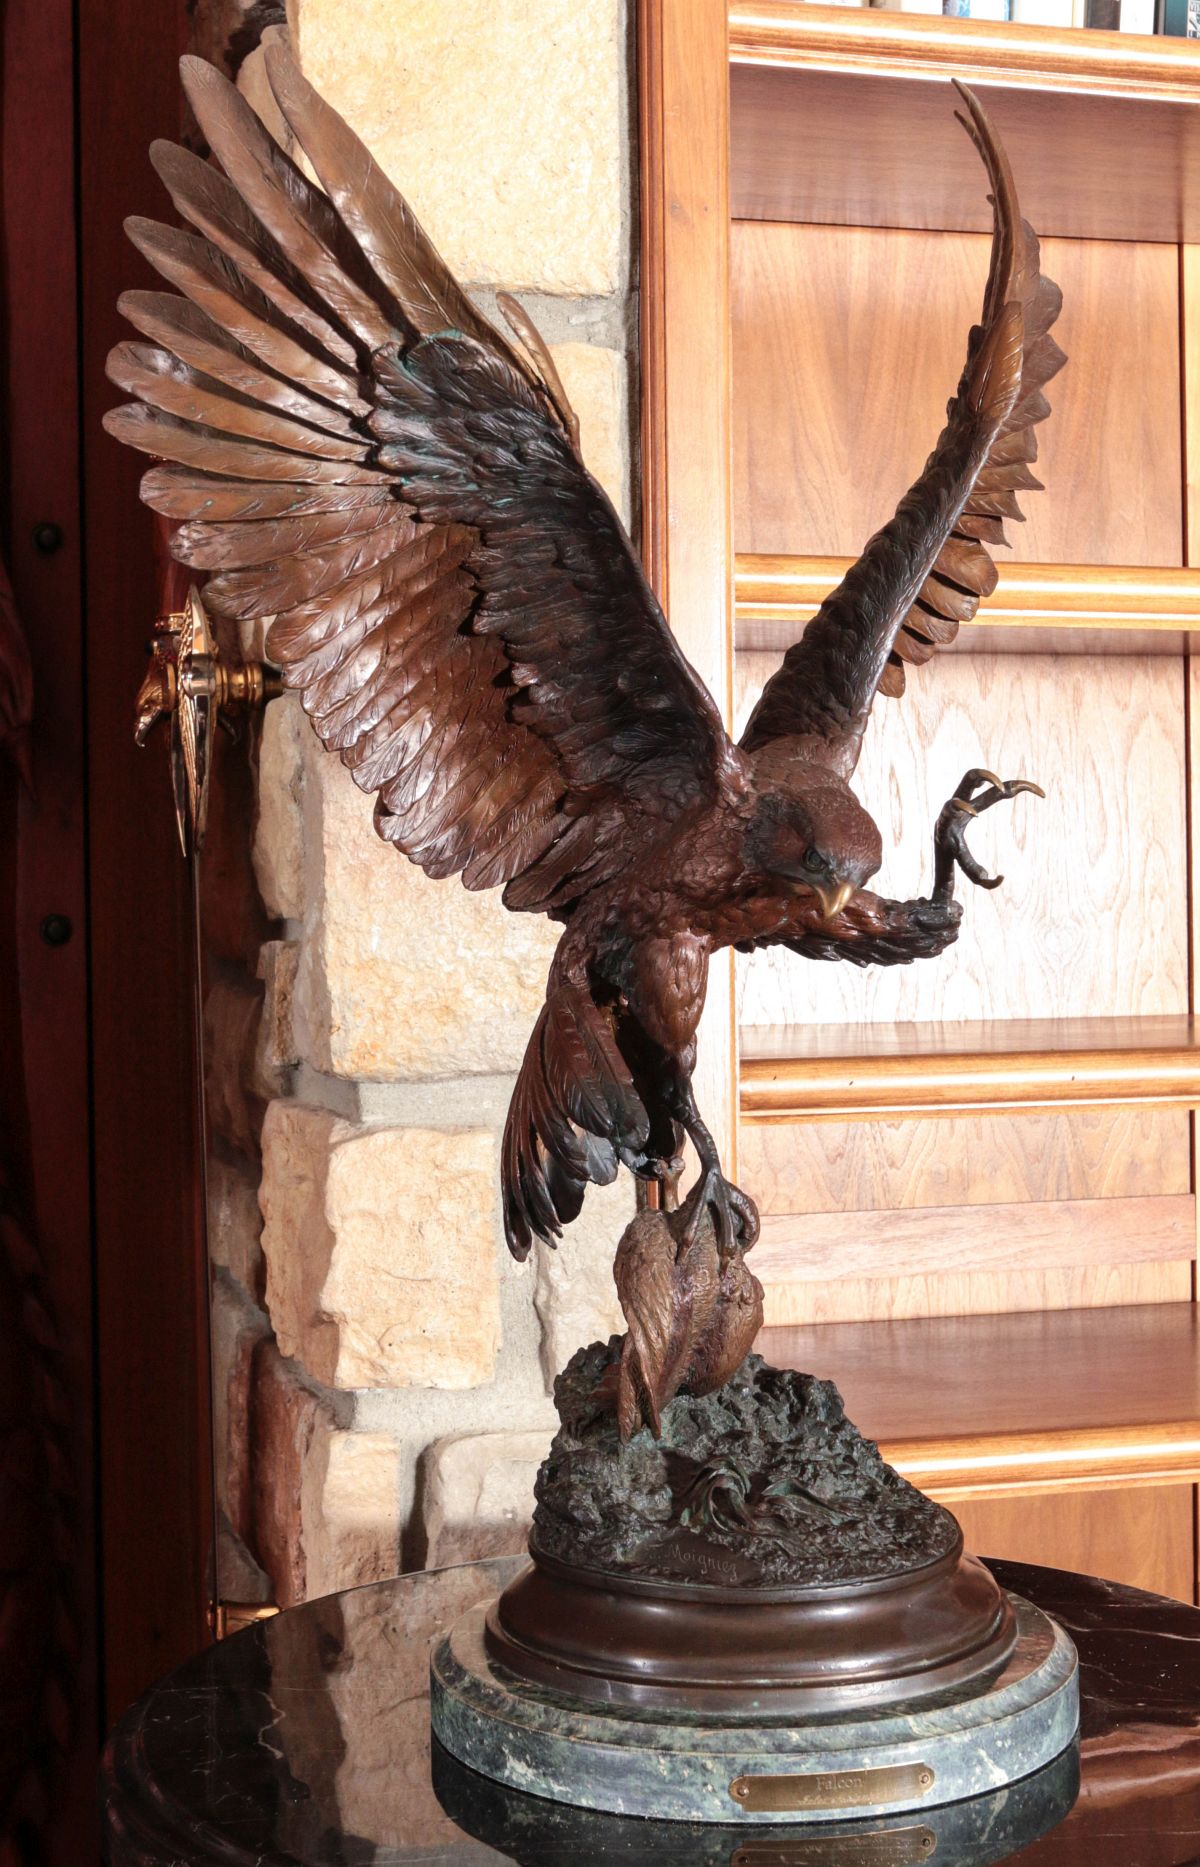 A LARGE HIGHLY DETAILED BRONZE FALCON SCULPTURE